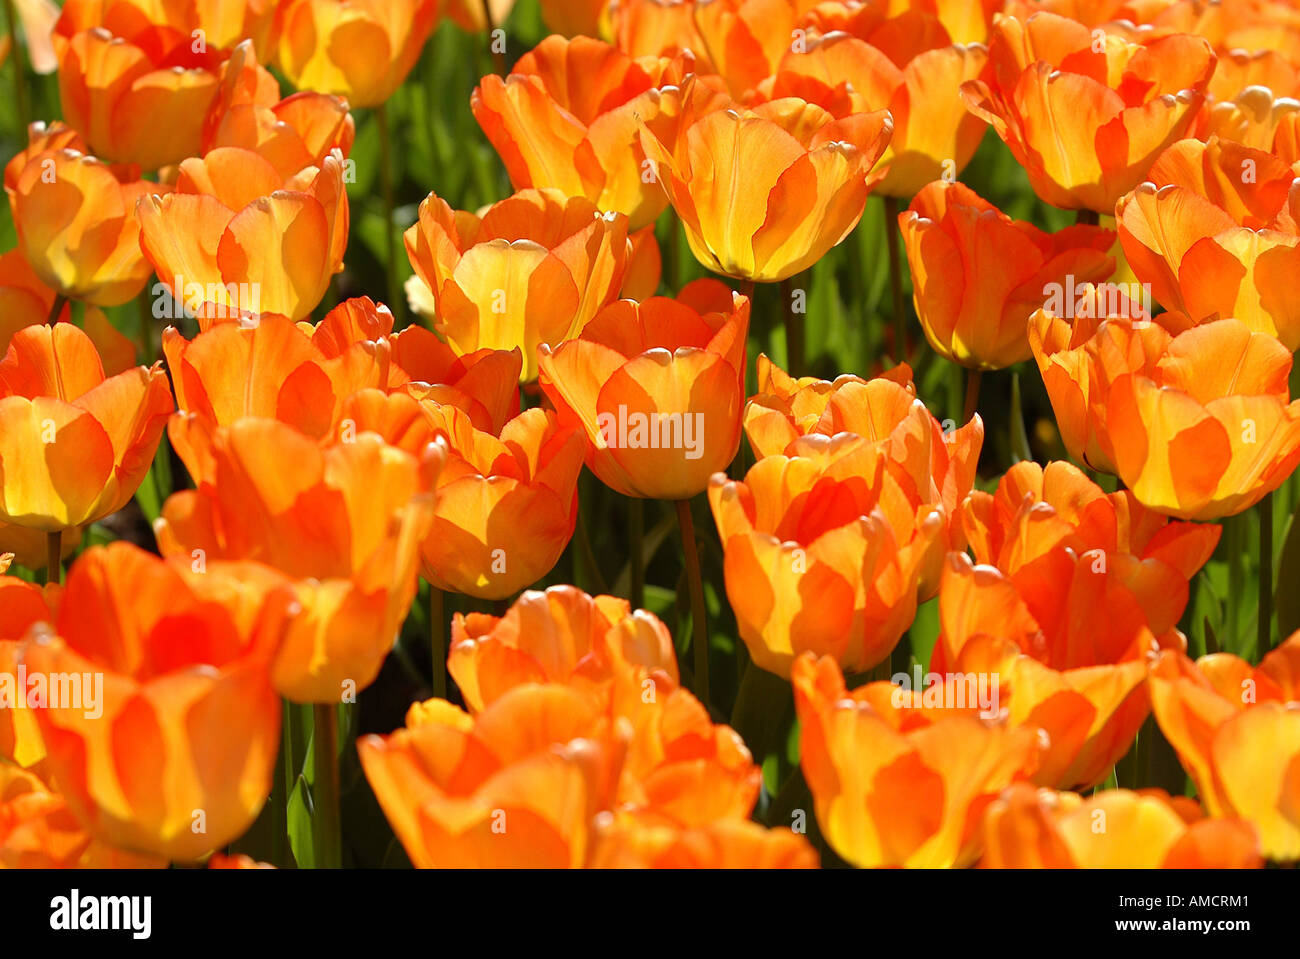 Norway Tulips close up elevated view Stock Photo